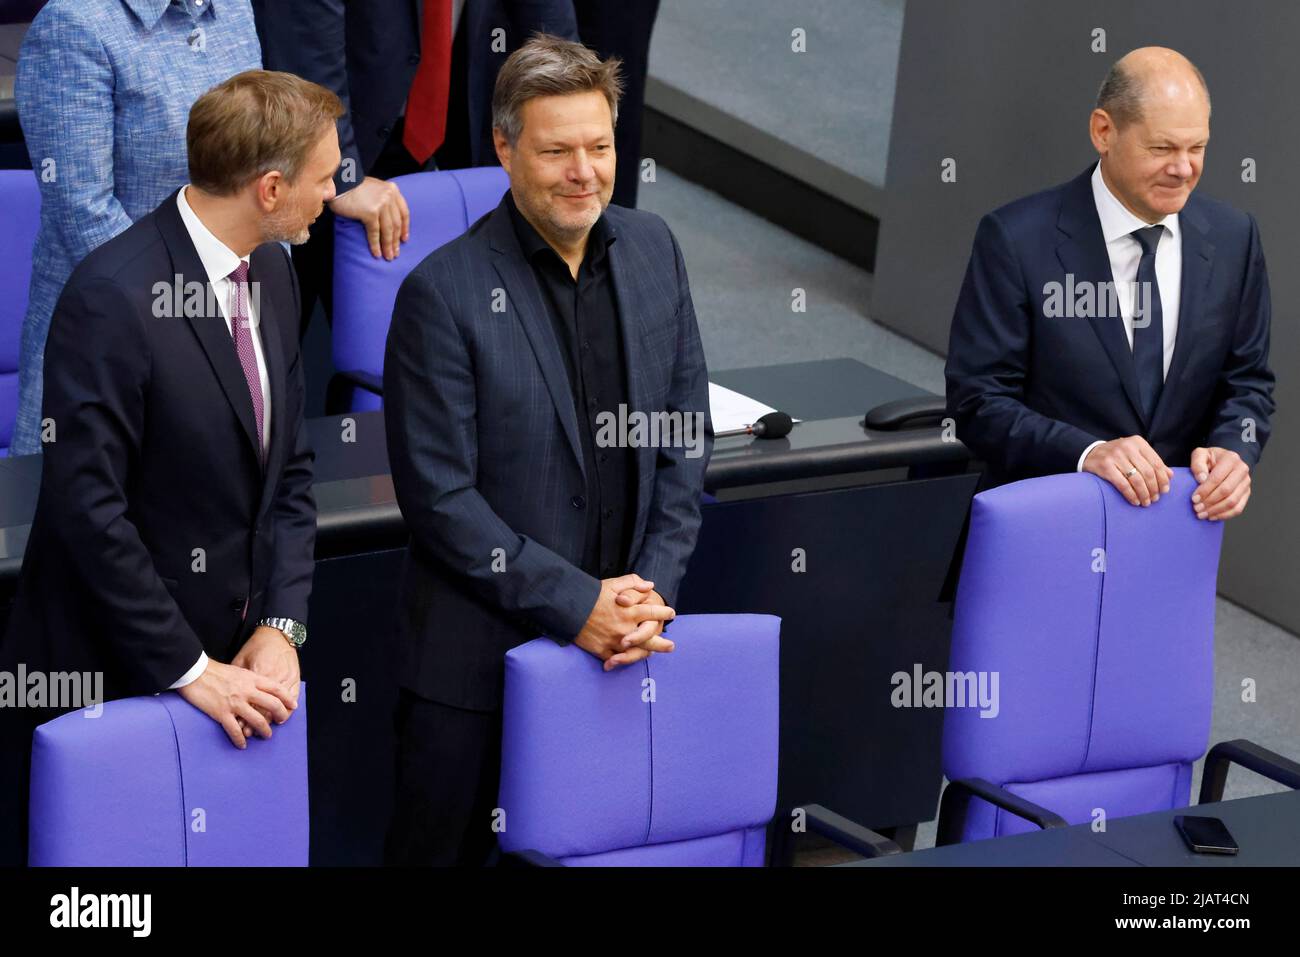 German Finance Minister Christian Lindner, German Minister for Economic Affairs and Climate Action Robert Habeck and German Chancellor Olaf Scholz attend a session of German lower house of parliament, Bundestag, in Berlin, Germany June 1, 2022. REUTERS/Hannibal Hanschke Stock Photo